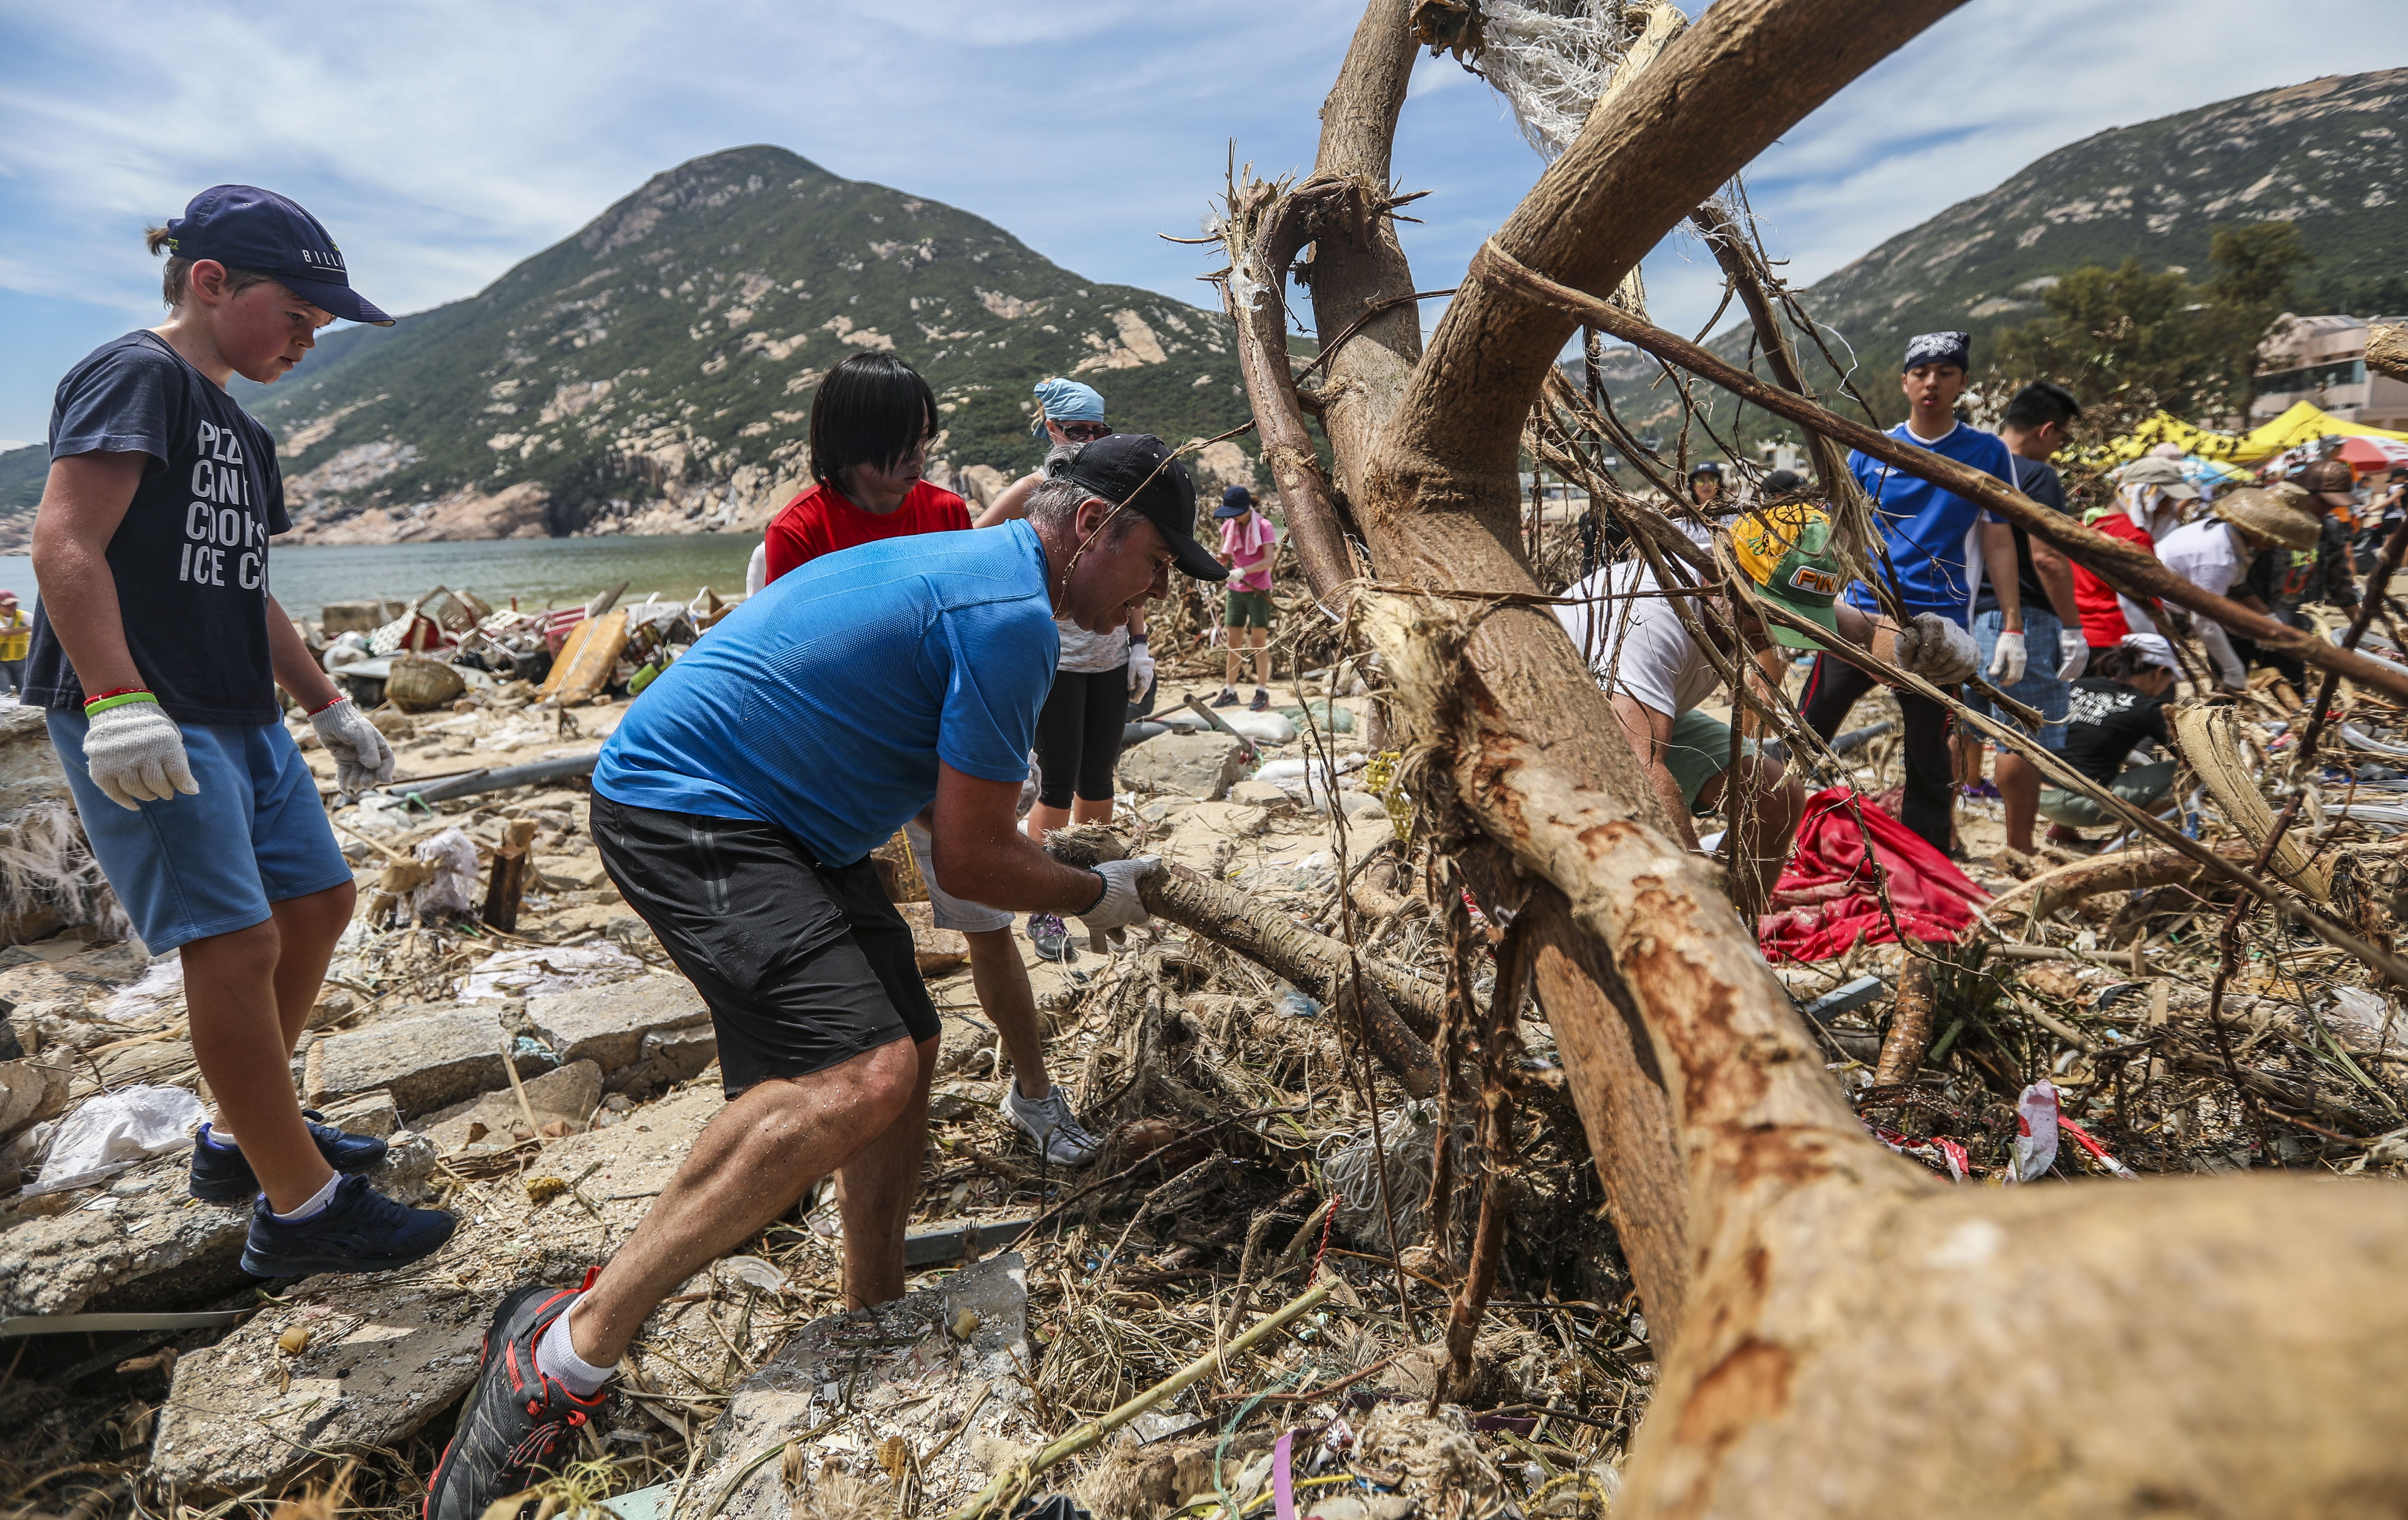 Shek O villagers and volunteers clean up debris and trees after Typhoon Mangkhut wreaked havoc on Hong Kong. Photo: Xiaomei Chen